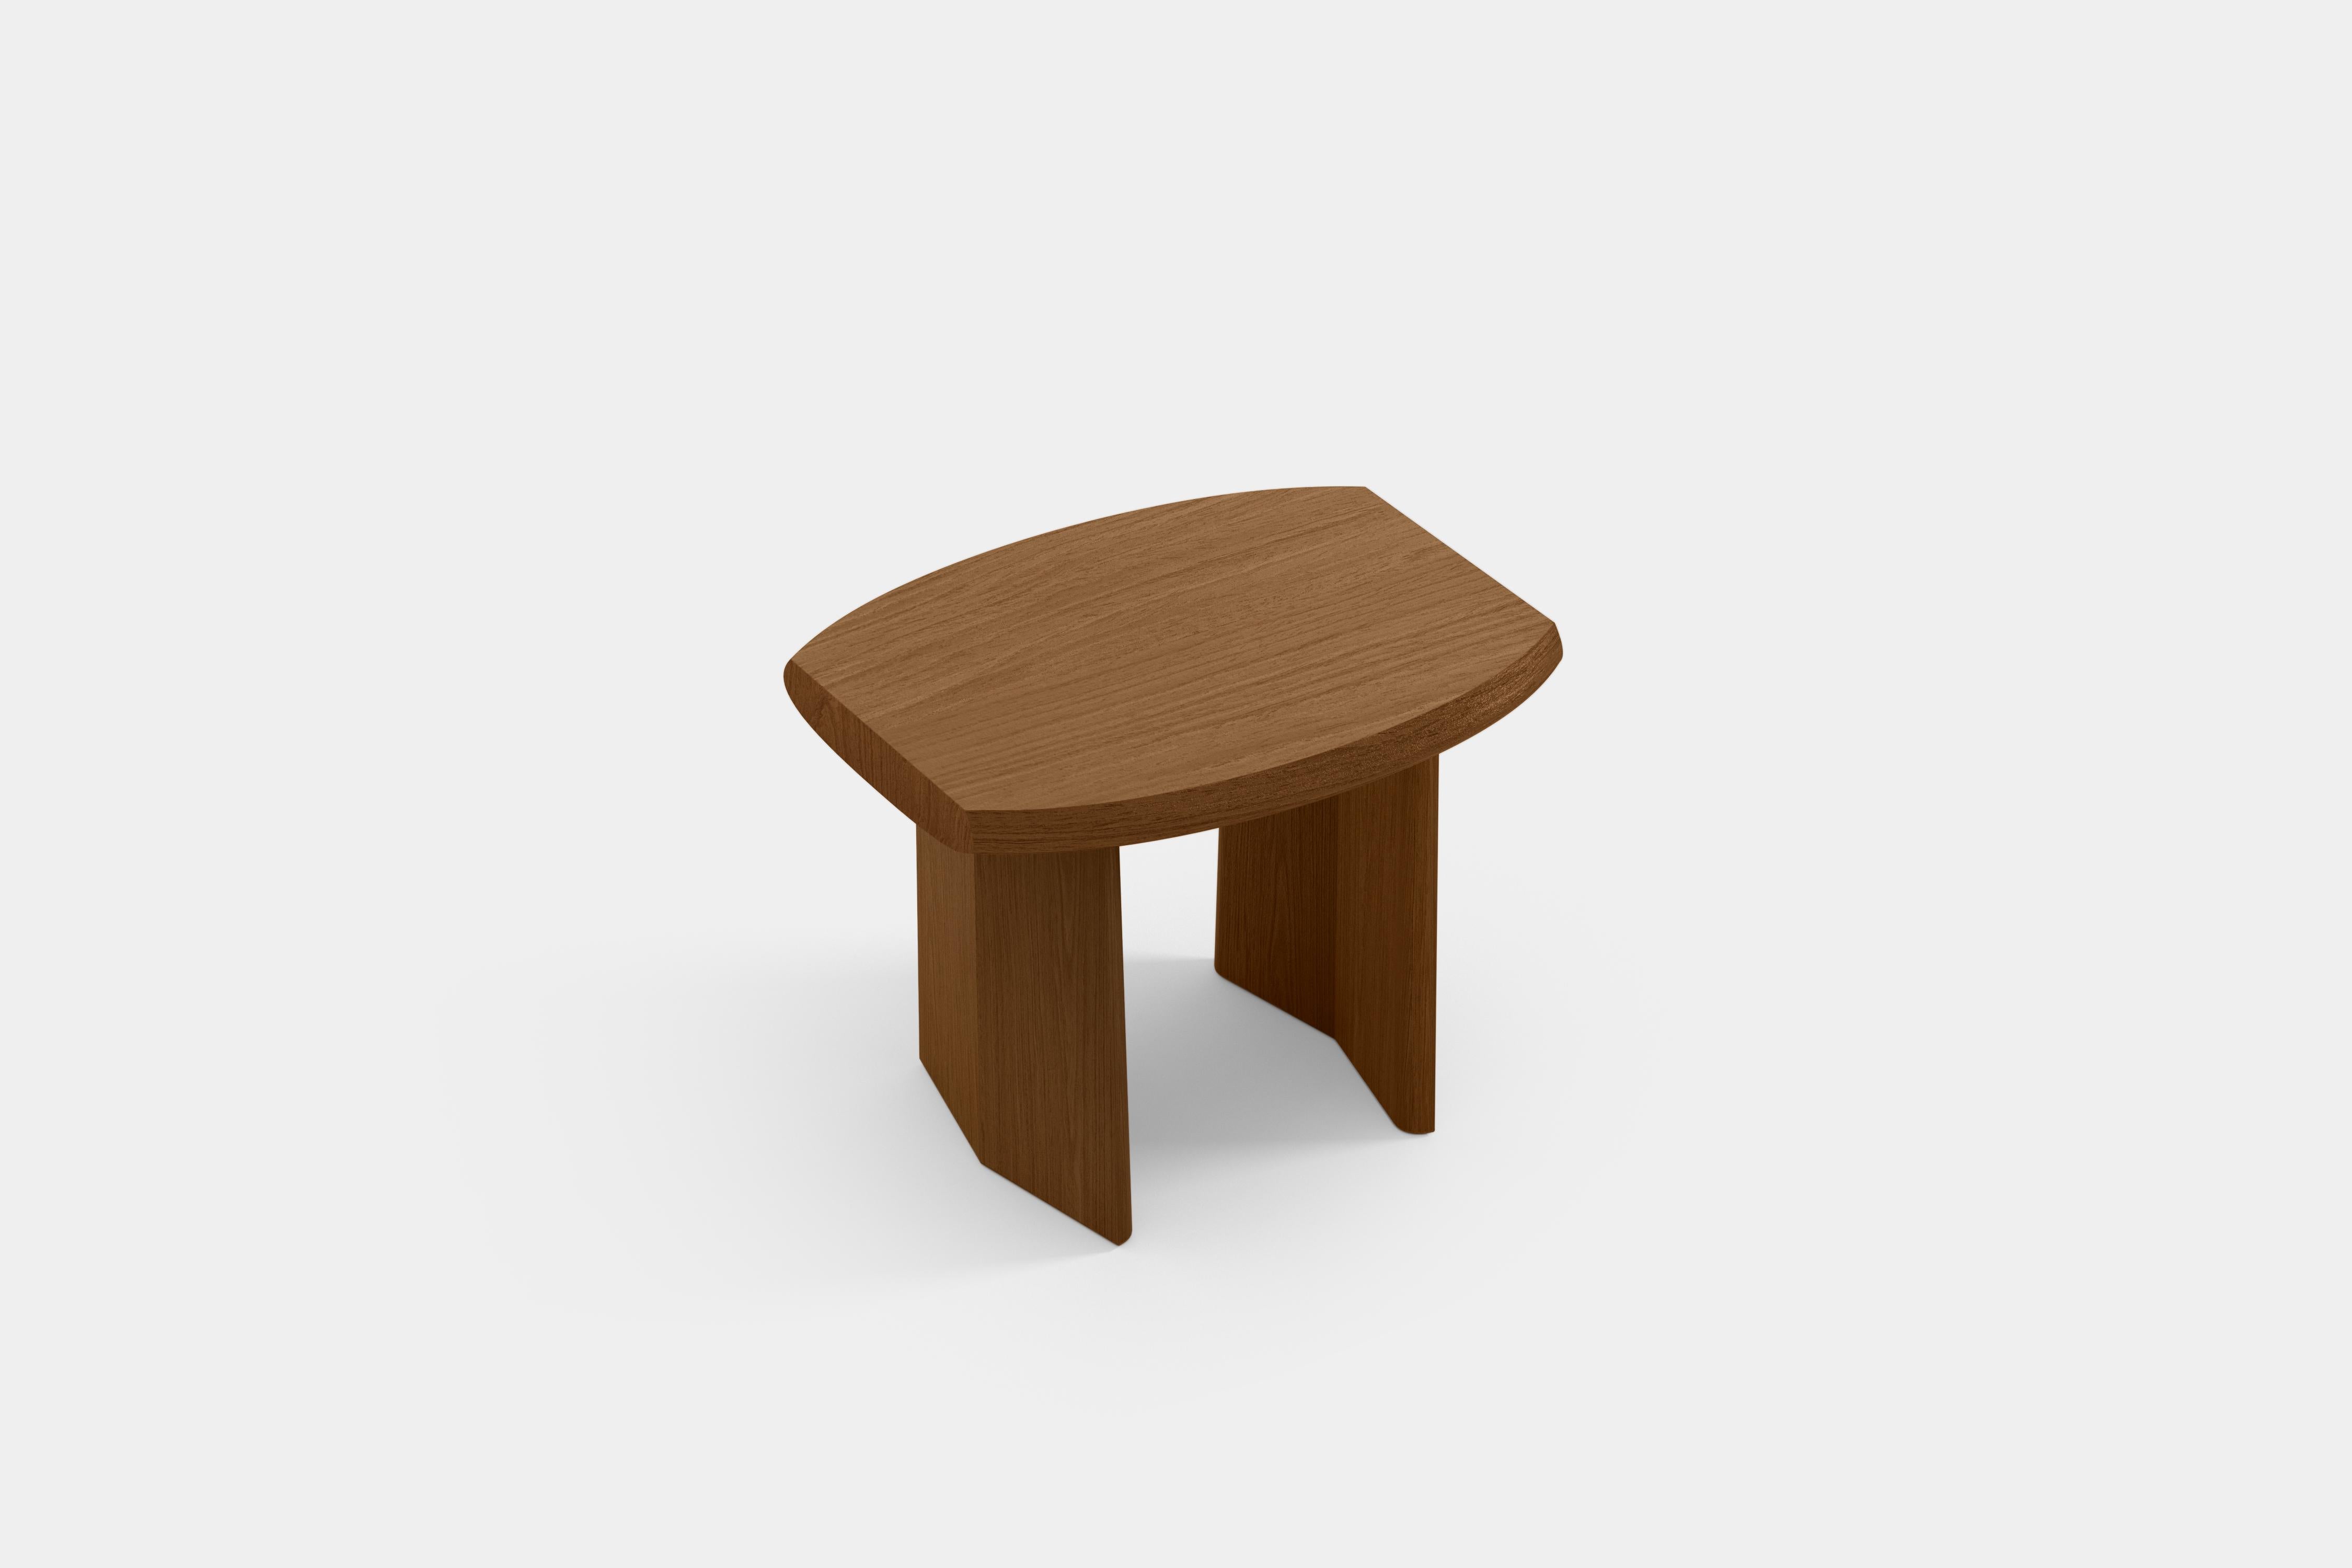 Peana Side Table, Night Stand, Auxiliary Table in Red Tinted Wood by Joel Escalona

Peana, which in English translates to base or pedestal, is a series of tables and different surfaces inspired by the idea of creating worthy furniture pieces to